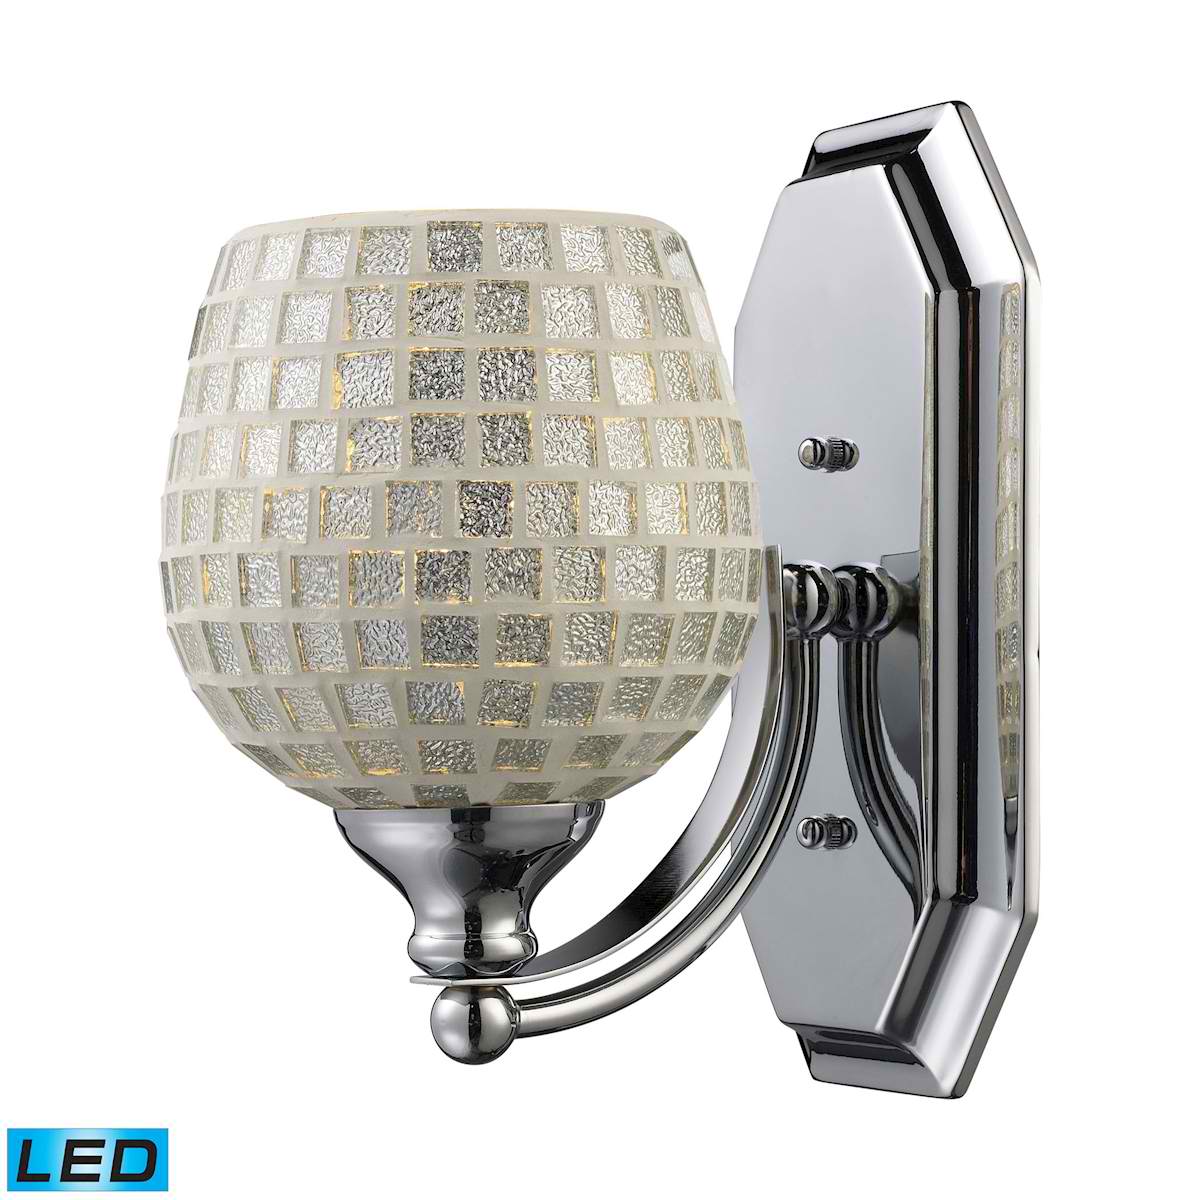 1 Light Vanity in Polished Chrome and Silver Mosaic Glass - LED Offering Up To 800 Lumens (60 Watt Equivalent)